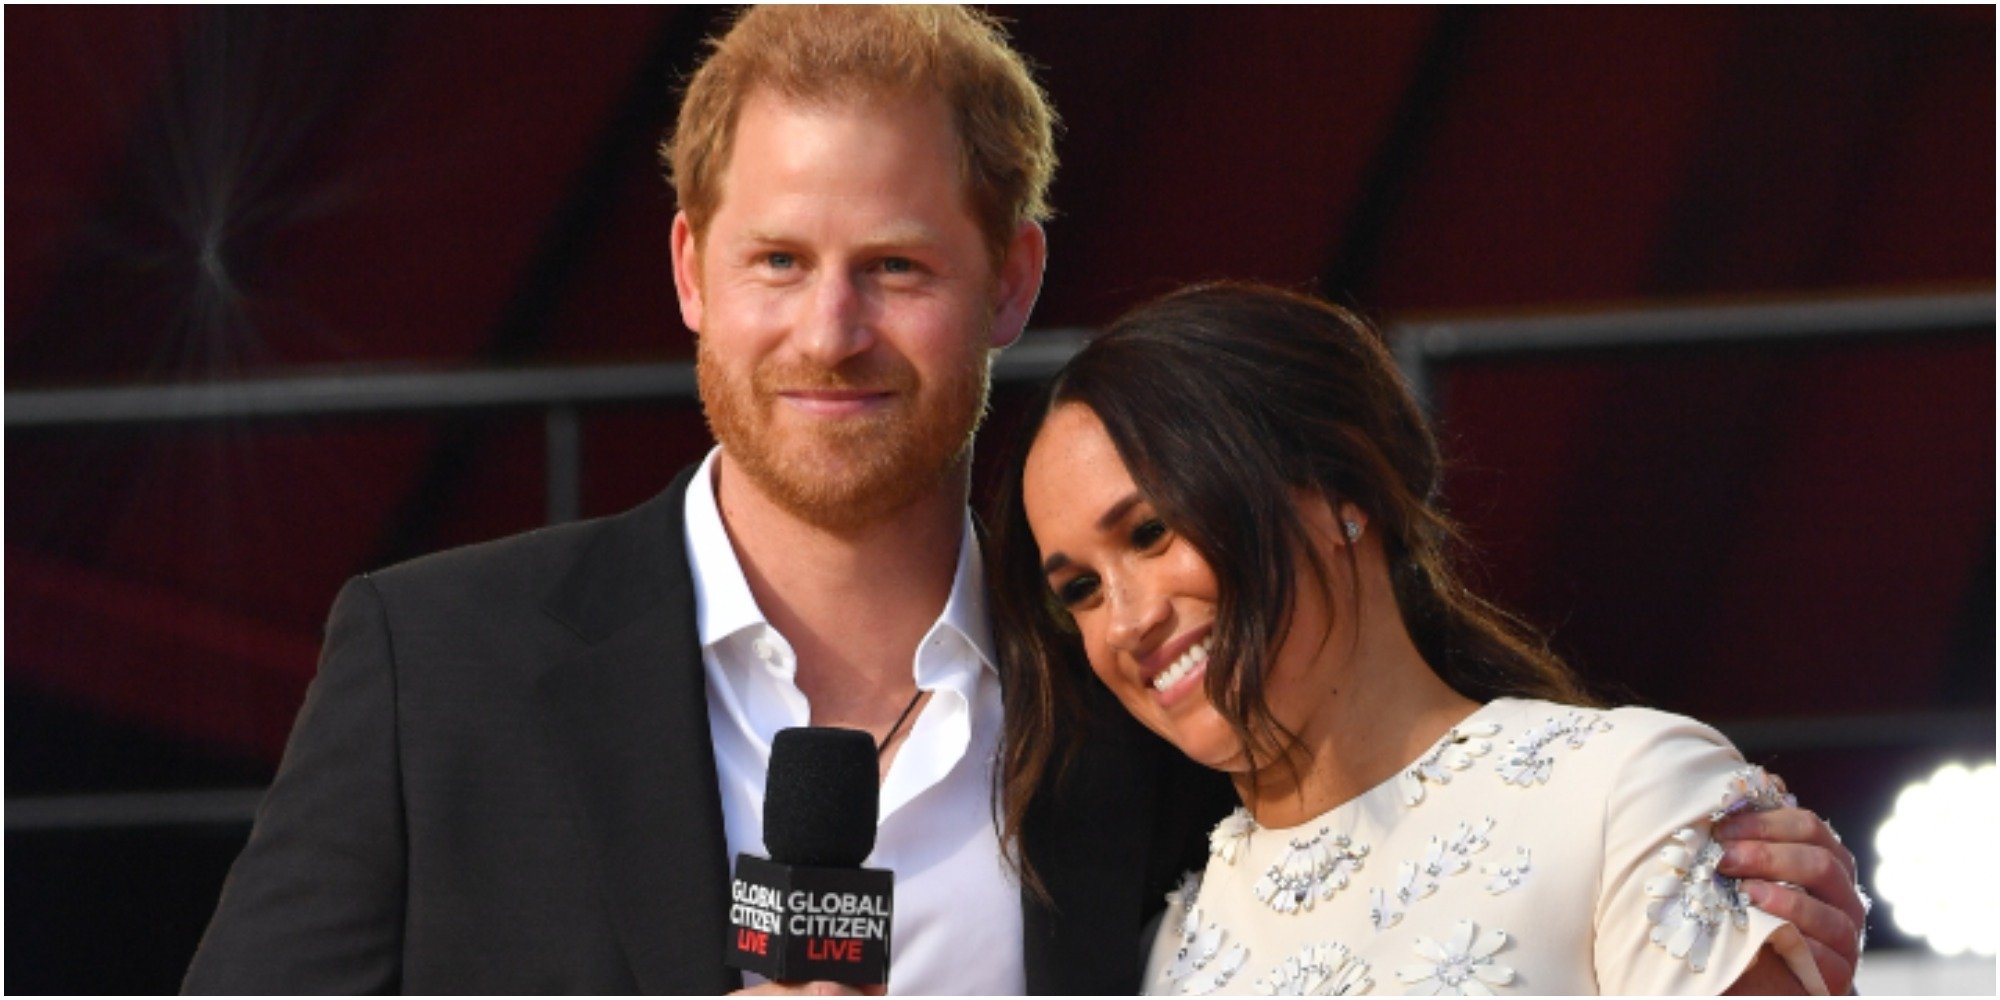 Meghan Markle wears a white dress and leans her head on Prince Harry who is wearing a suit with his shirt partially unbuttoned at the Global Citizen concert in Central Park on September 25, 2021 in New York City.